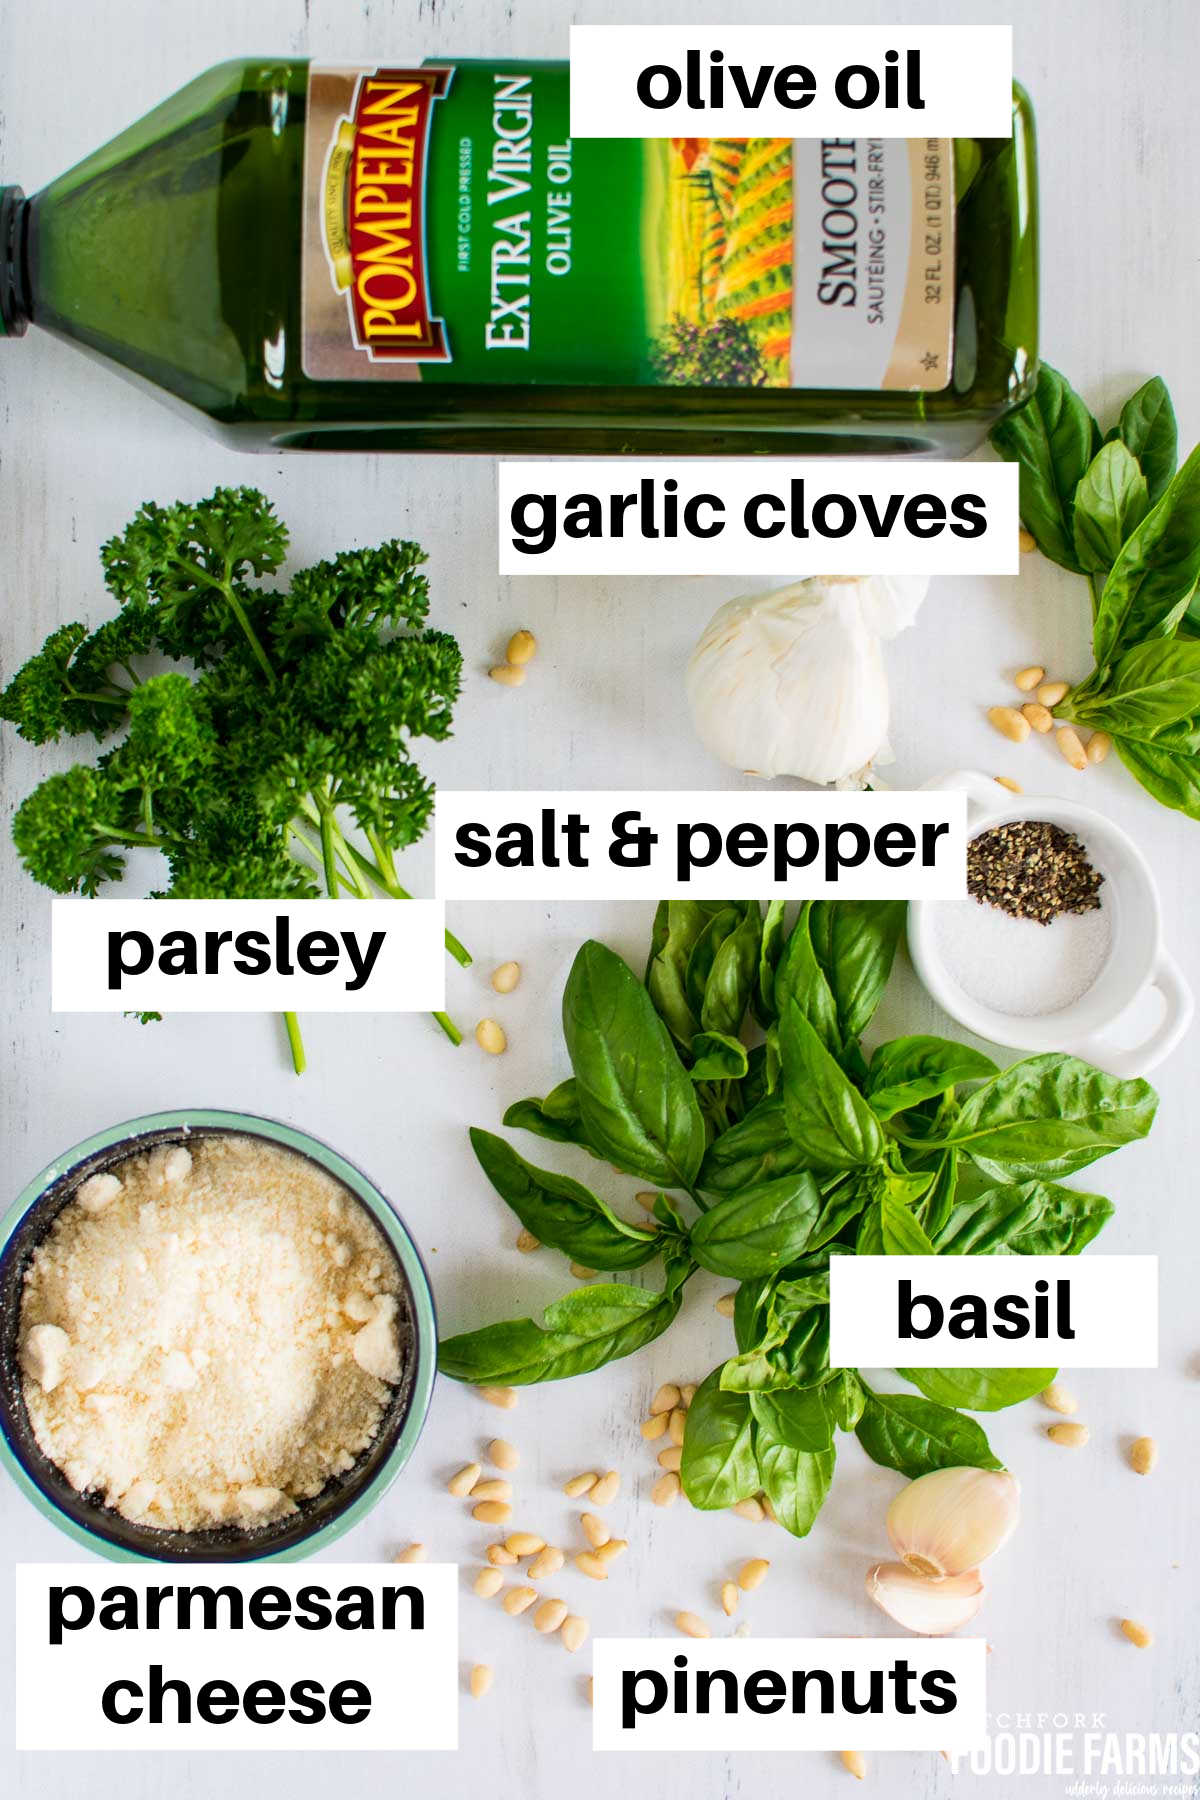 Ingredients needed to make pesto sauce on a white board.